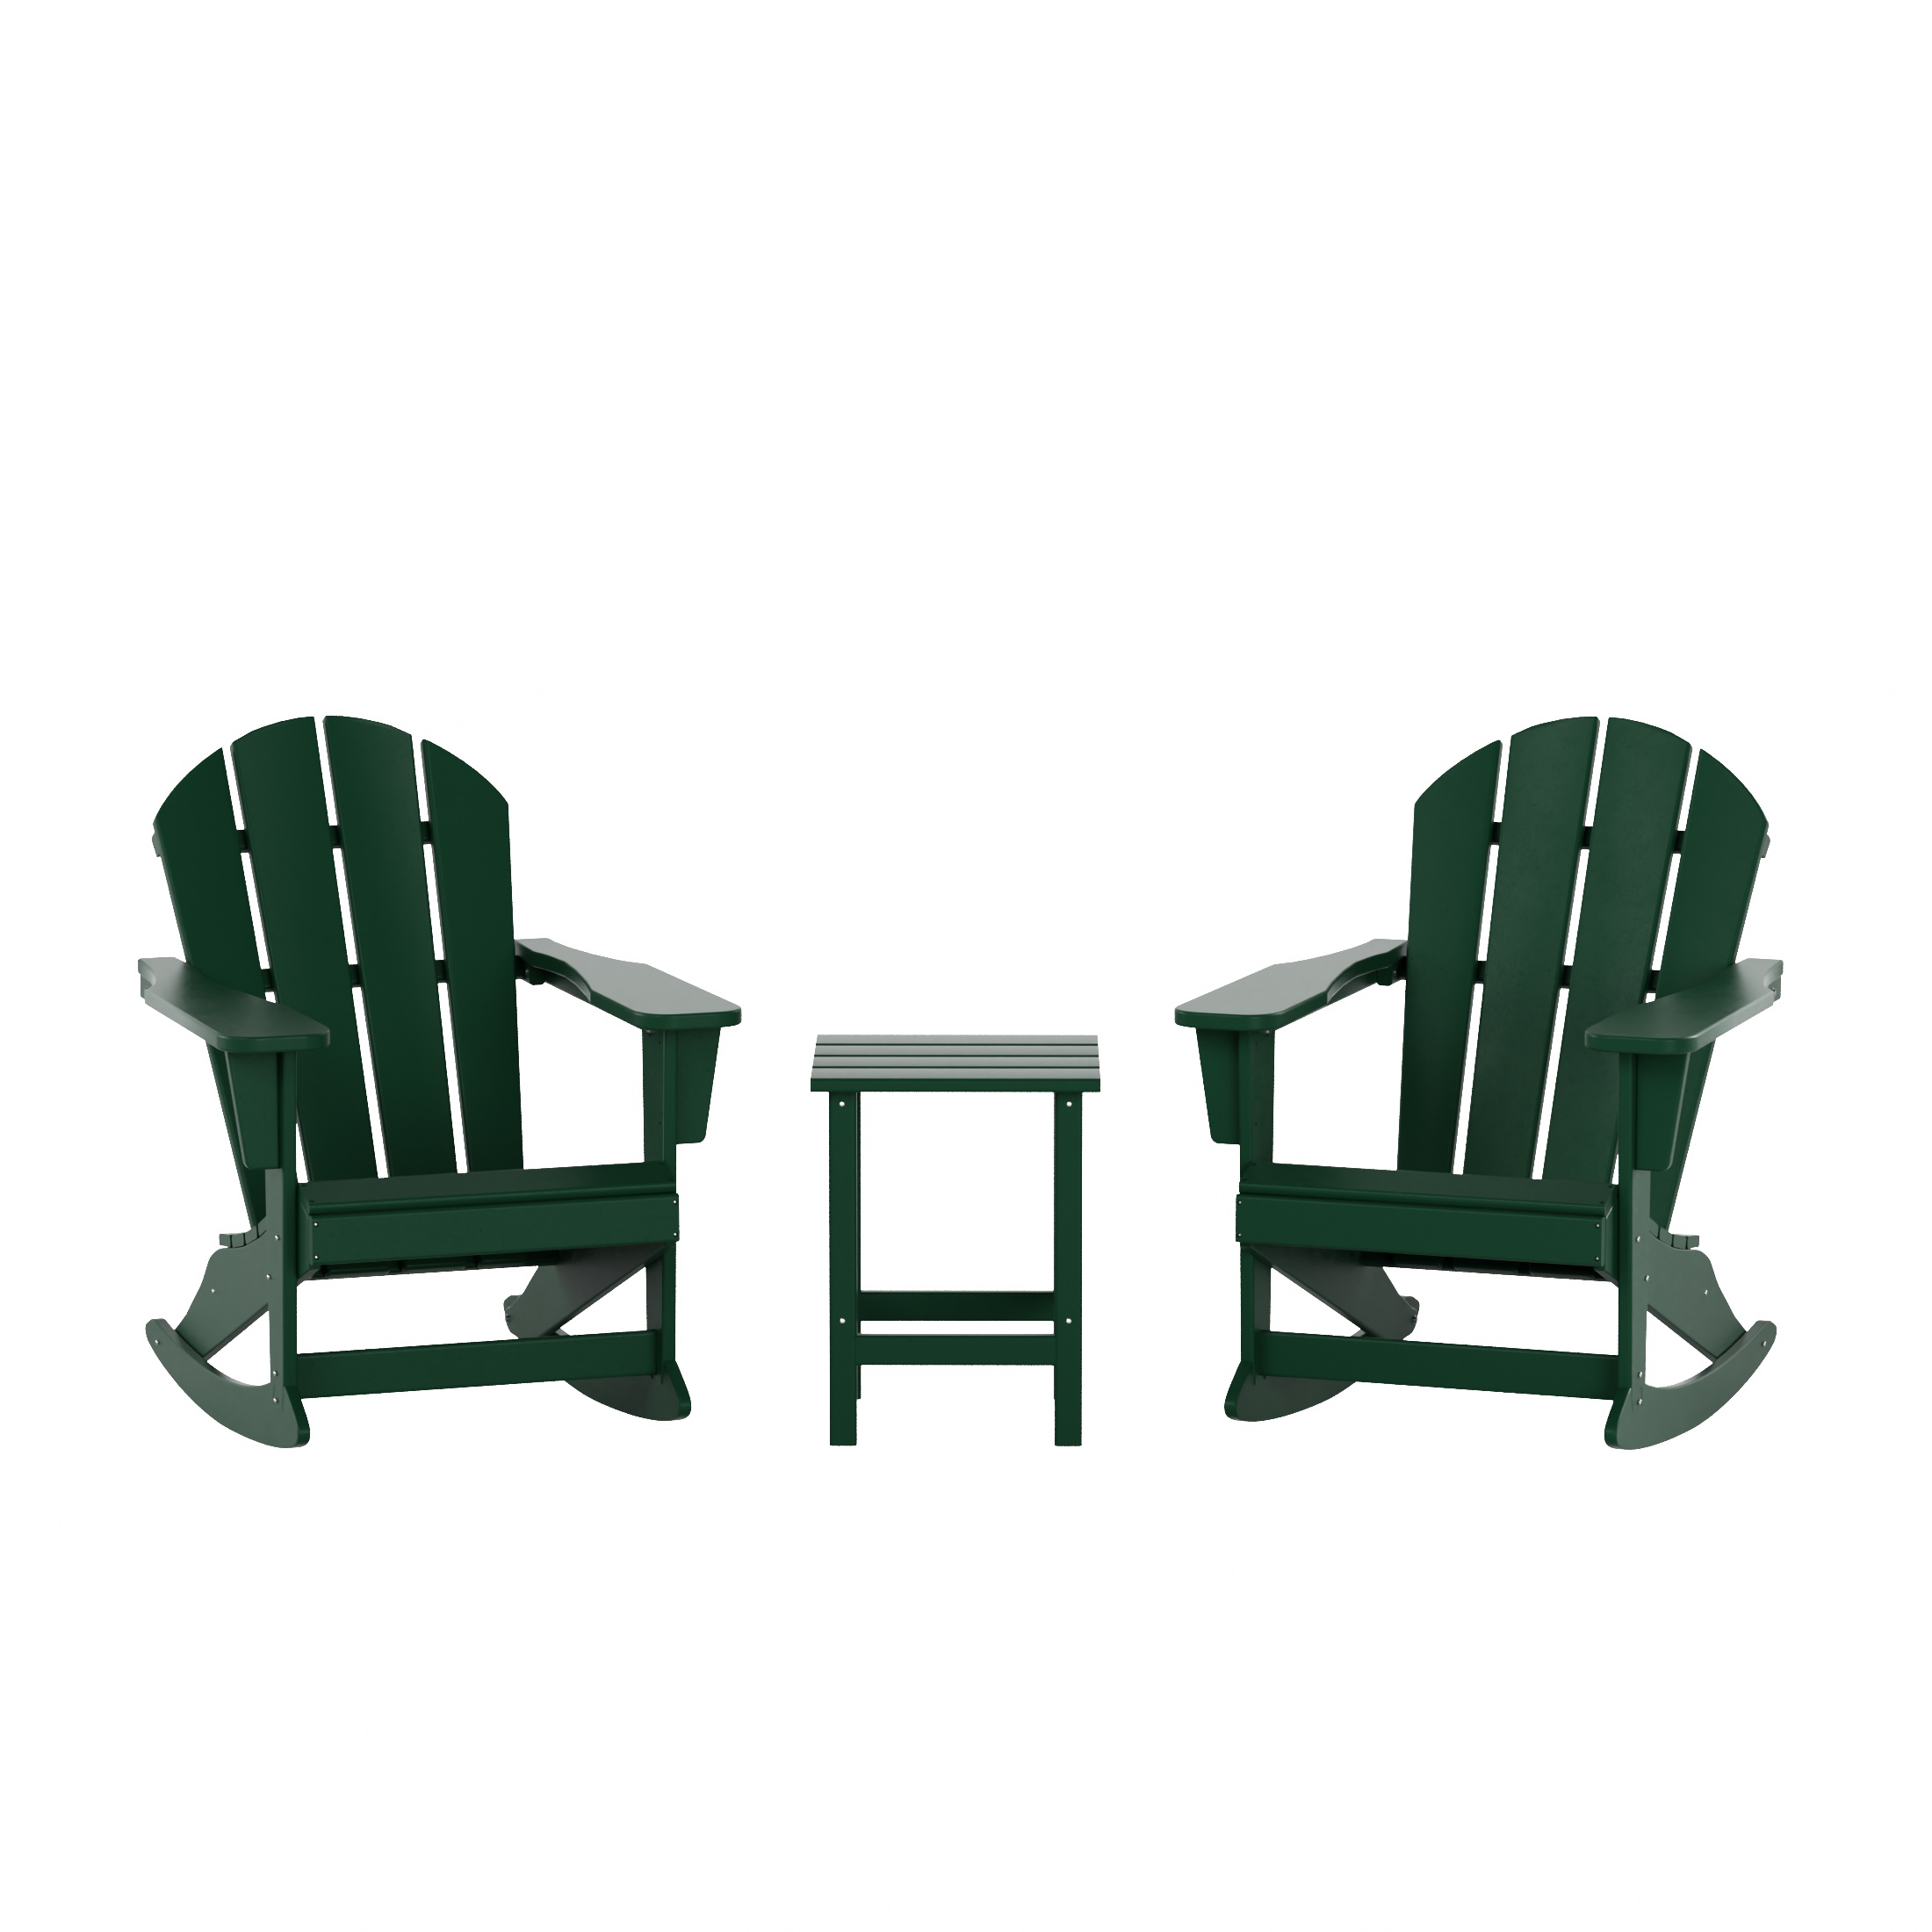 WestinTrends Malibu 3 Piece Outdoor Rocking Chair Set, All Weather Poly Lumber Porch Patio Adirondack Rocking Chair Set of 2 with Side Table, Dark Green - image 4 of 8